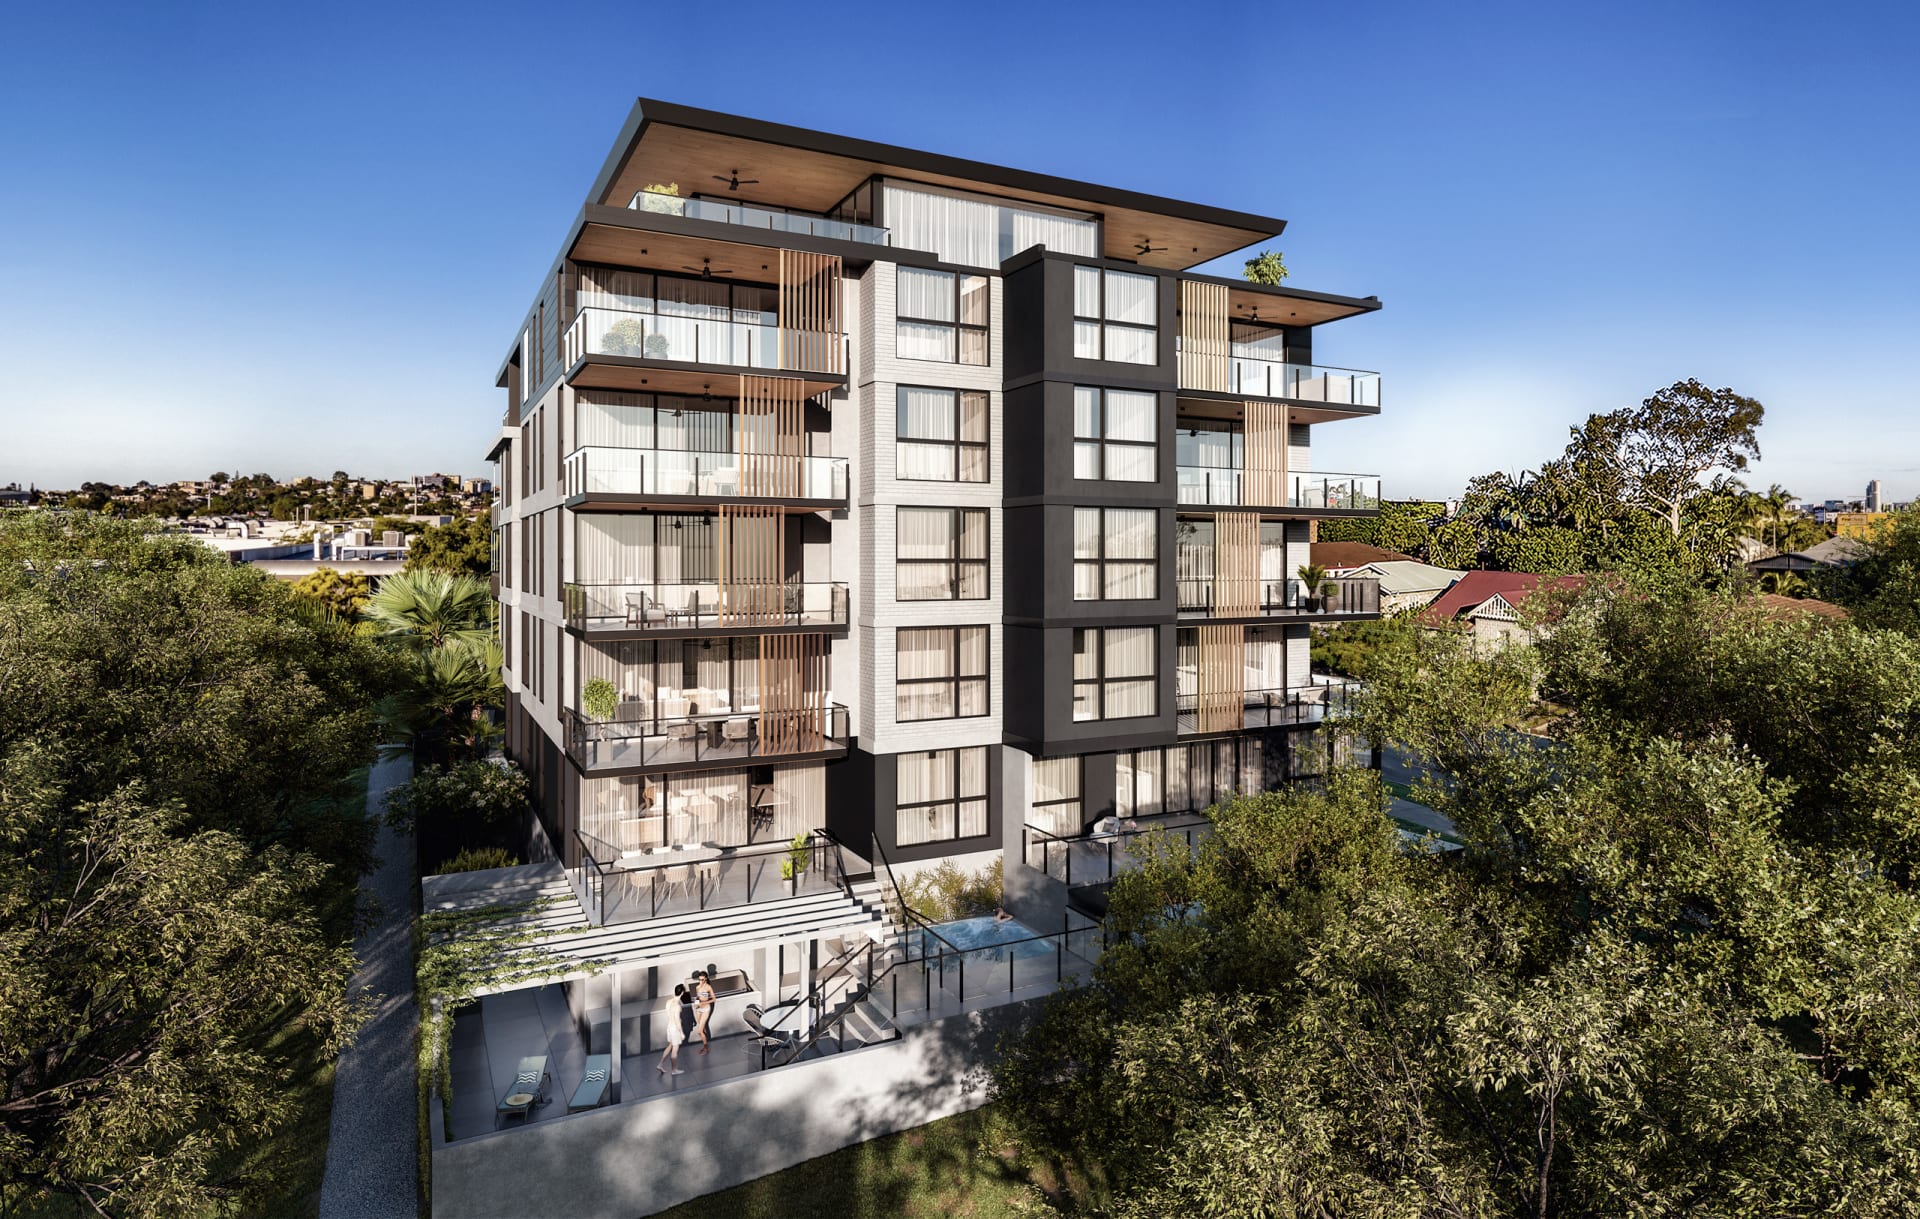 Parklane, Lutwyche apartments approach completion